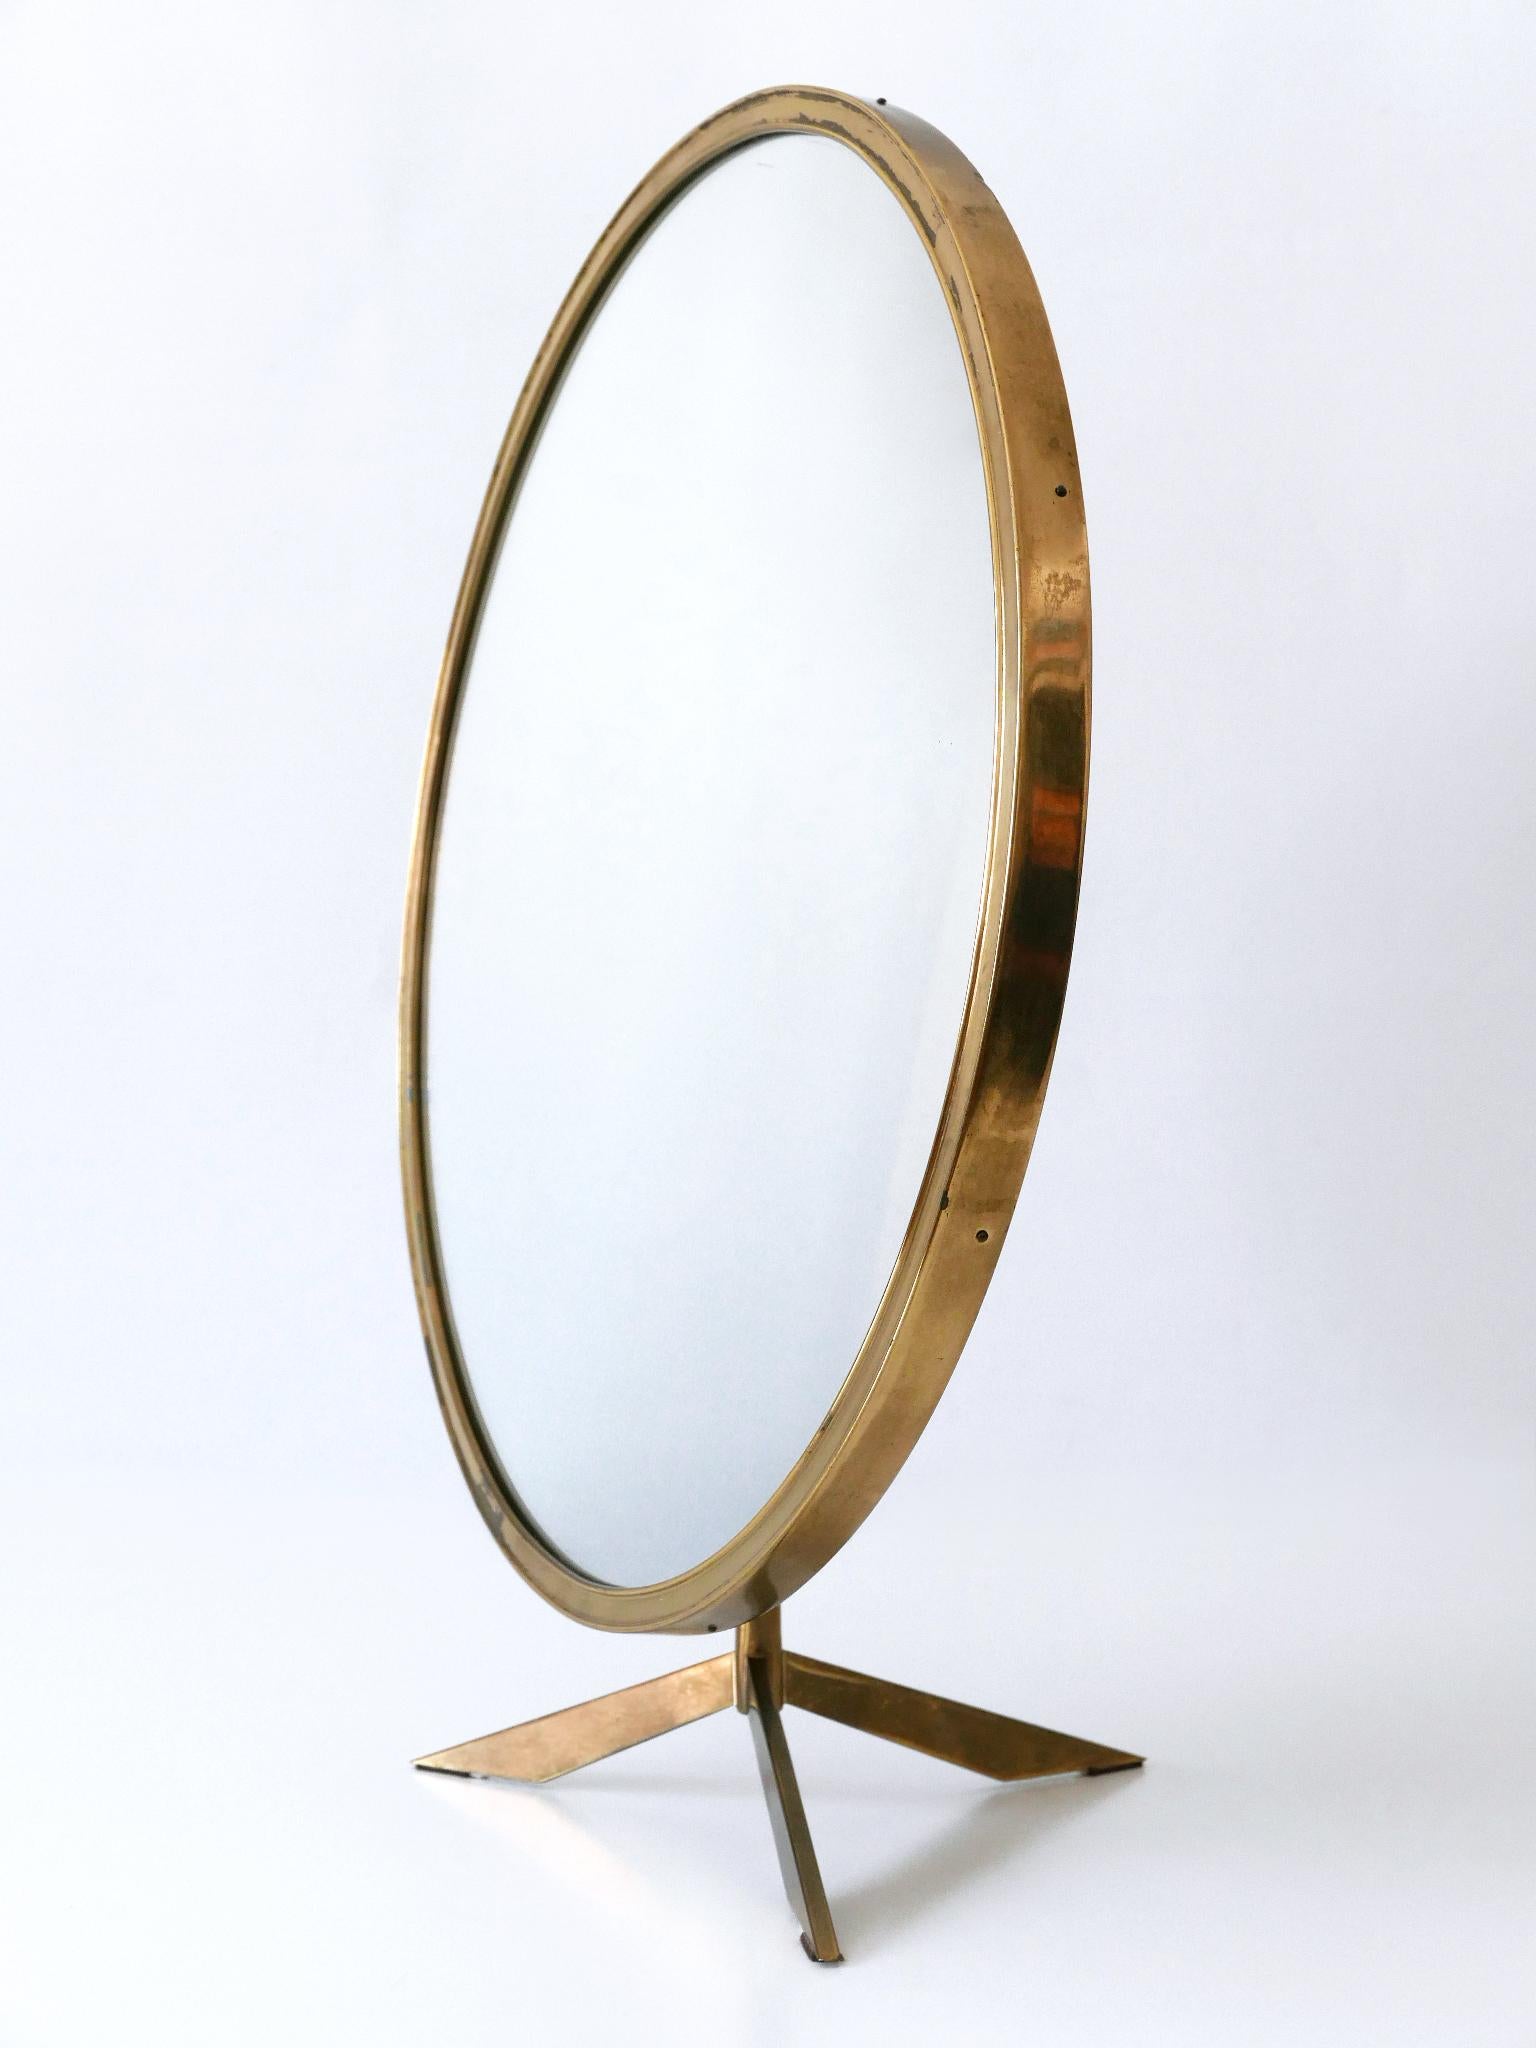 Elegant Mid-Century Modern Wall or Vanity Mirror by Zierform Germany 1950s For Sale 10